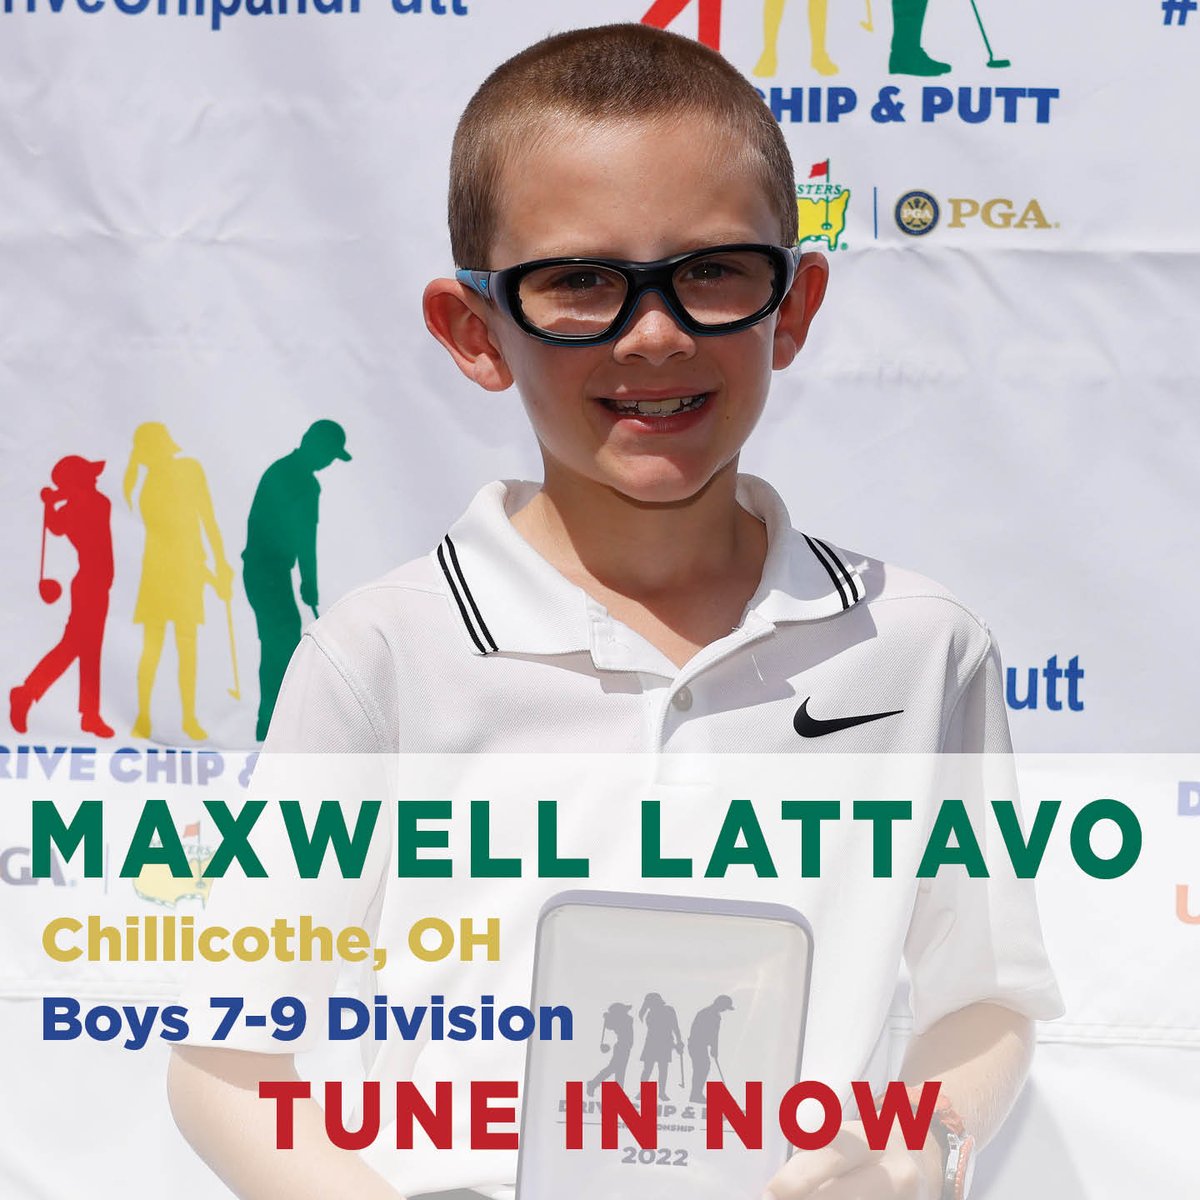 Maxwell Lattavo and the Boys 7-9 Division are just getting started at Augusta National Golf Club for the 2023 #DriveChipandPutt National Finals! Tune in to Golf Channel now to cheer Maxwell on from Southern Ohio! 

#SOPGAJrGolf